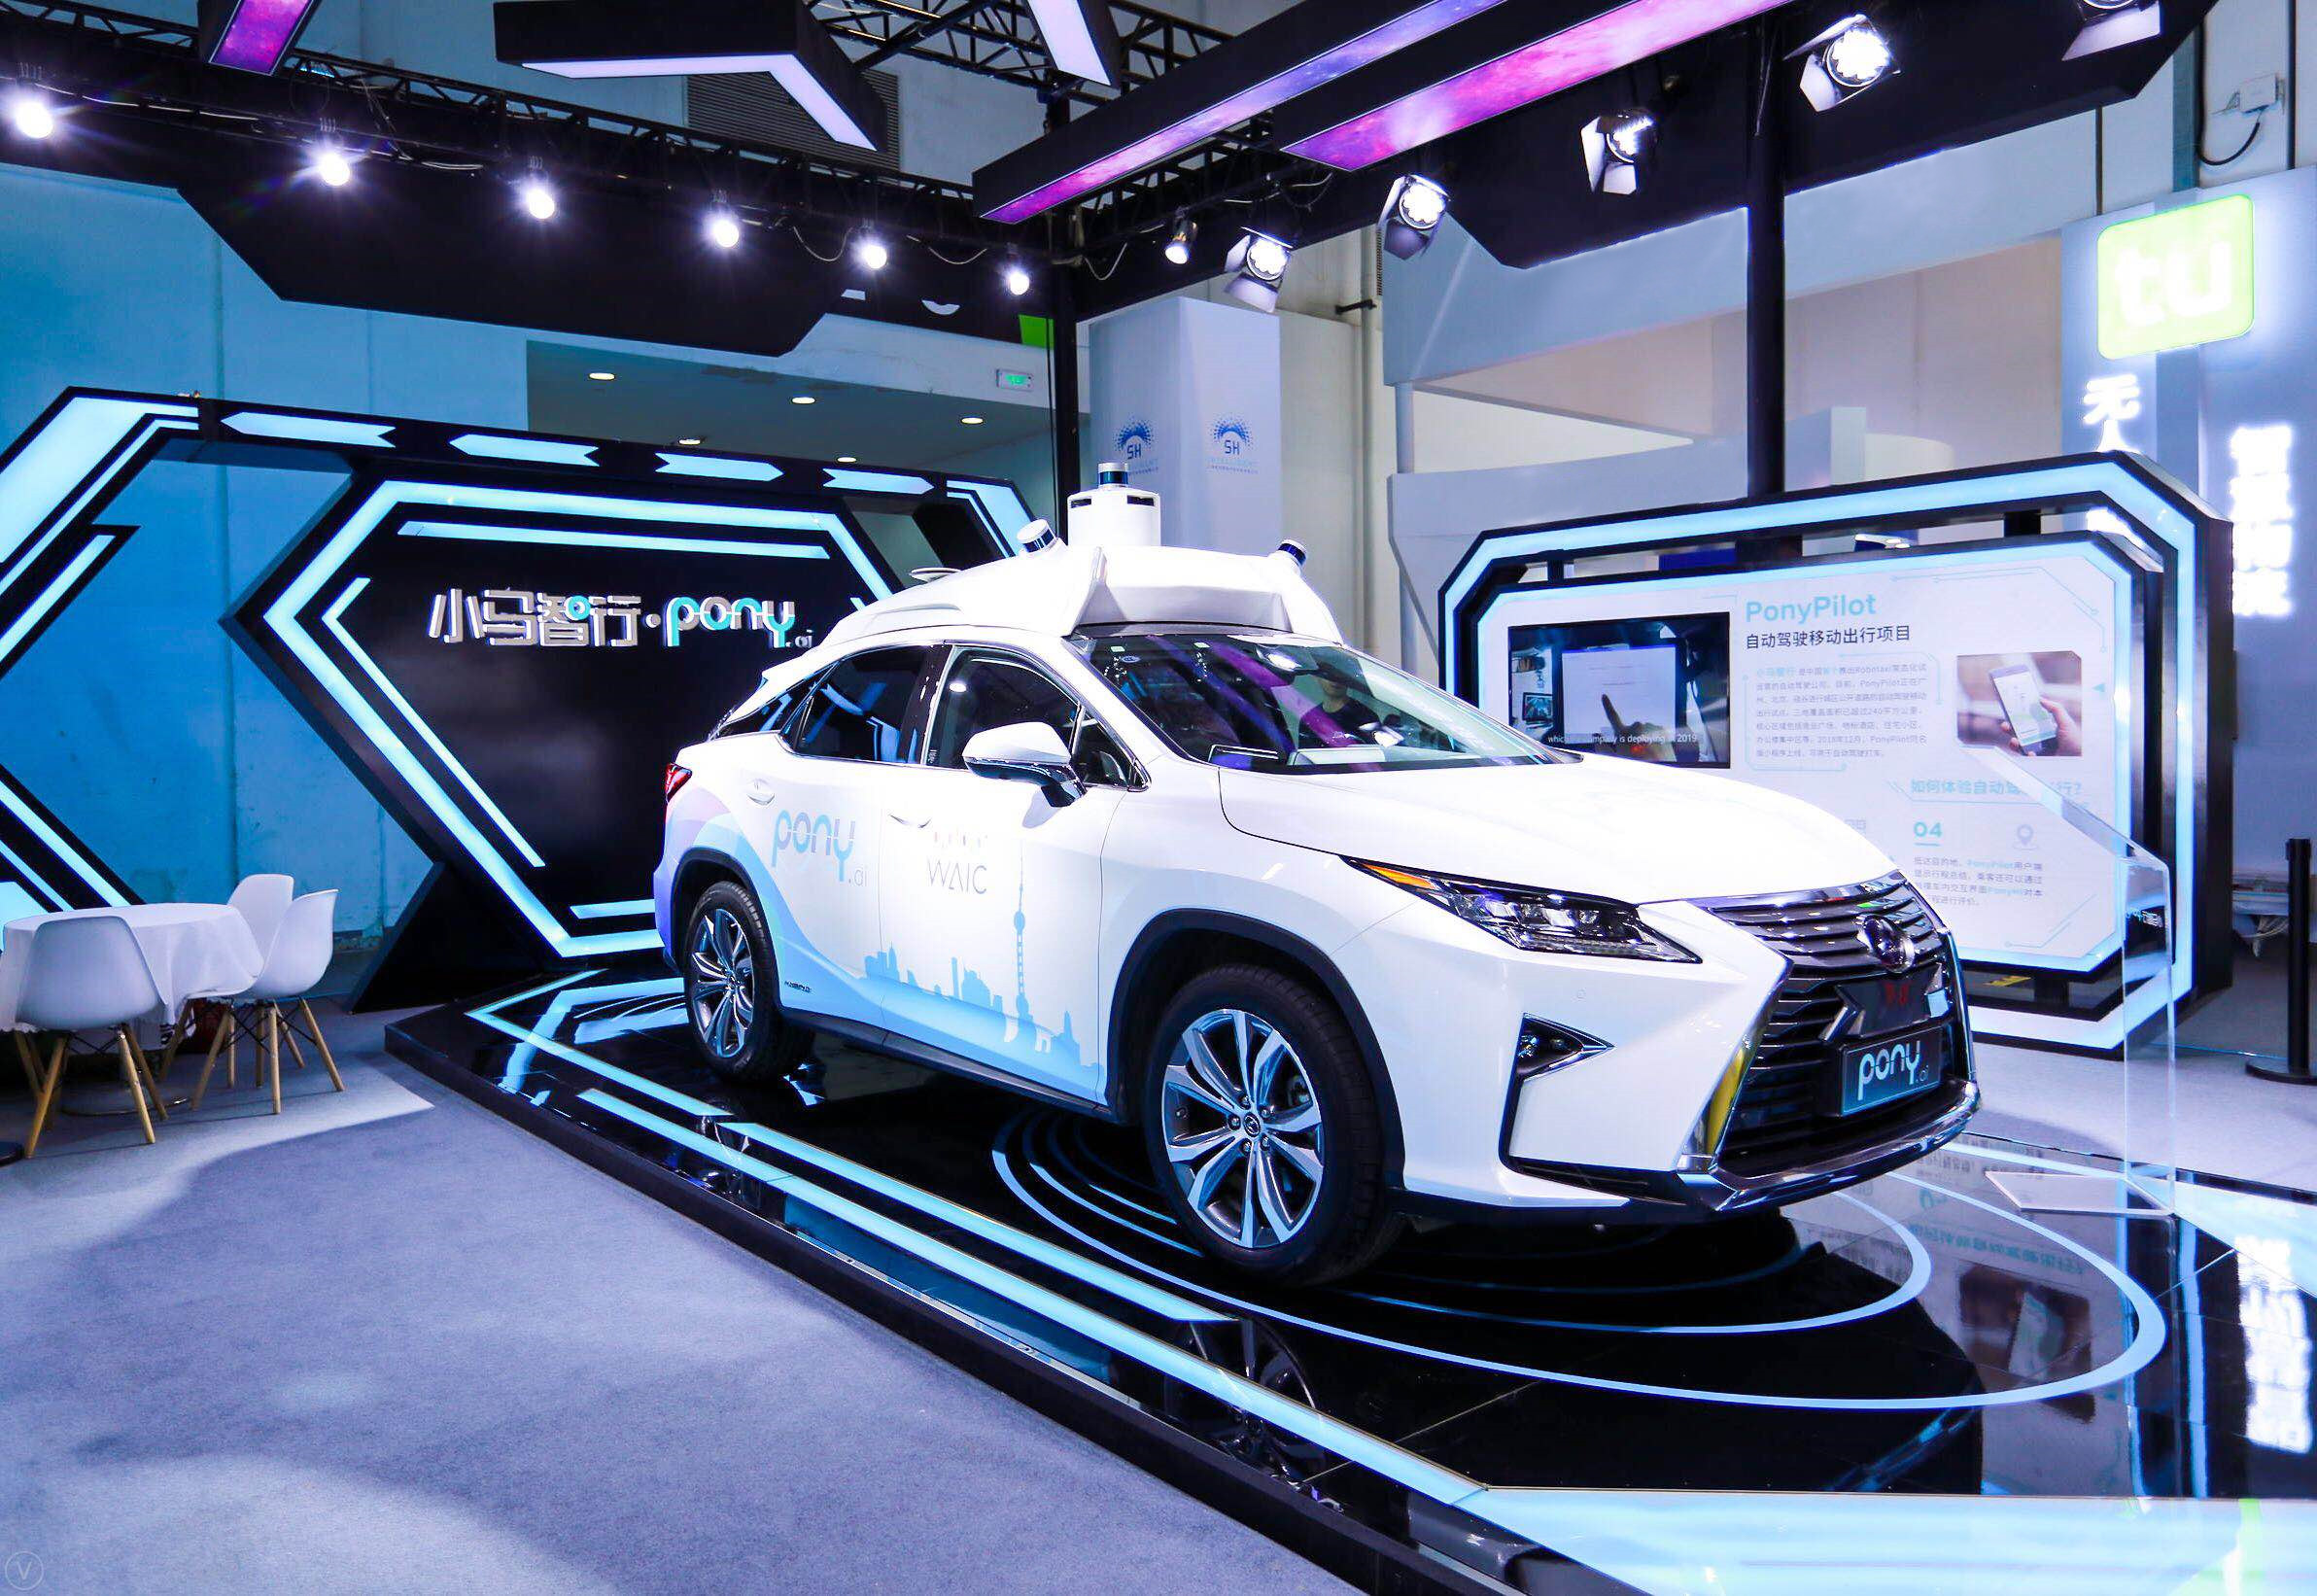 Chinese self-driving technology start-up Pony.ai gets US$100 million investment from Saudi Arabia's smart city developer Neom | South China Morning Post